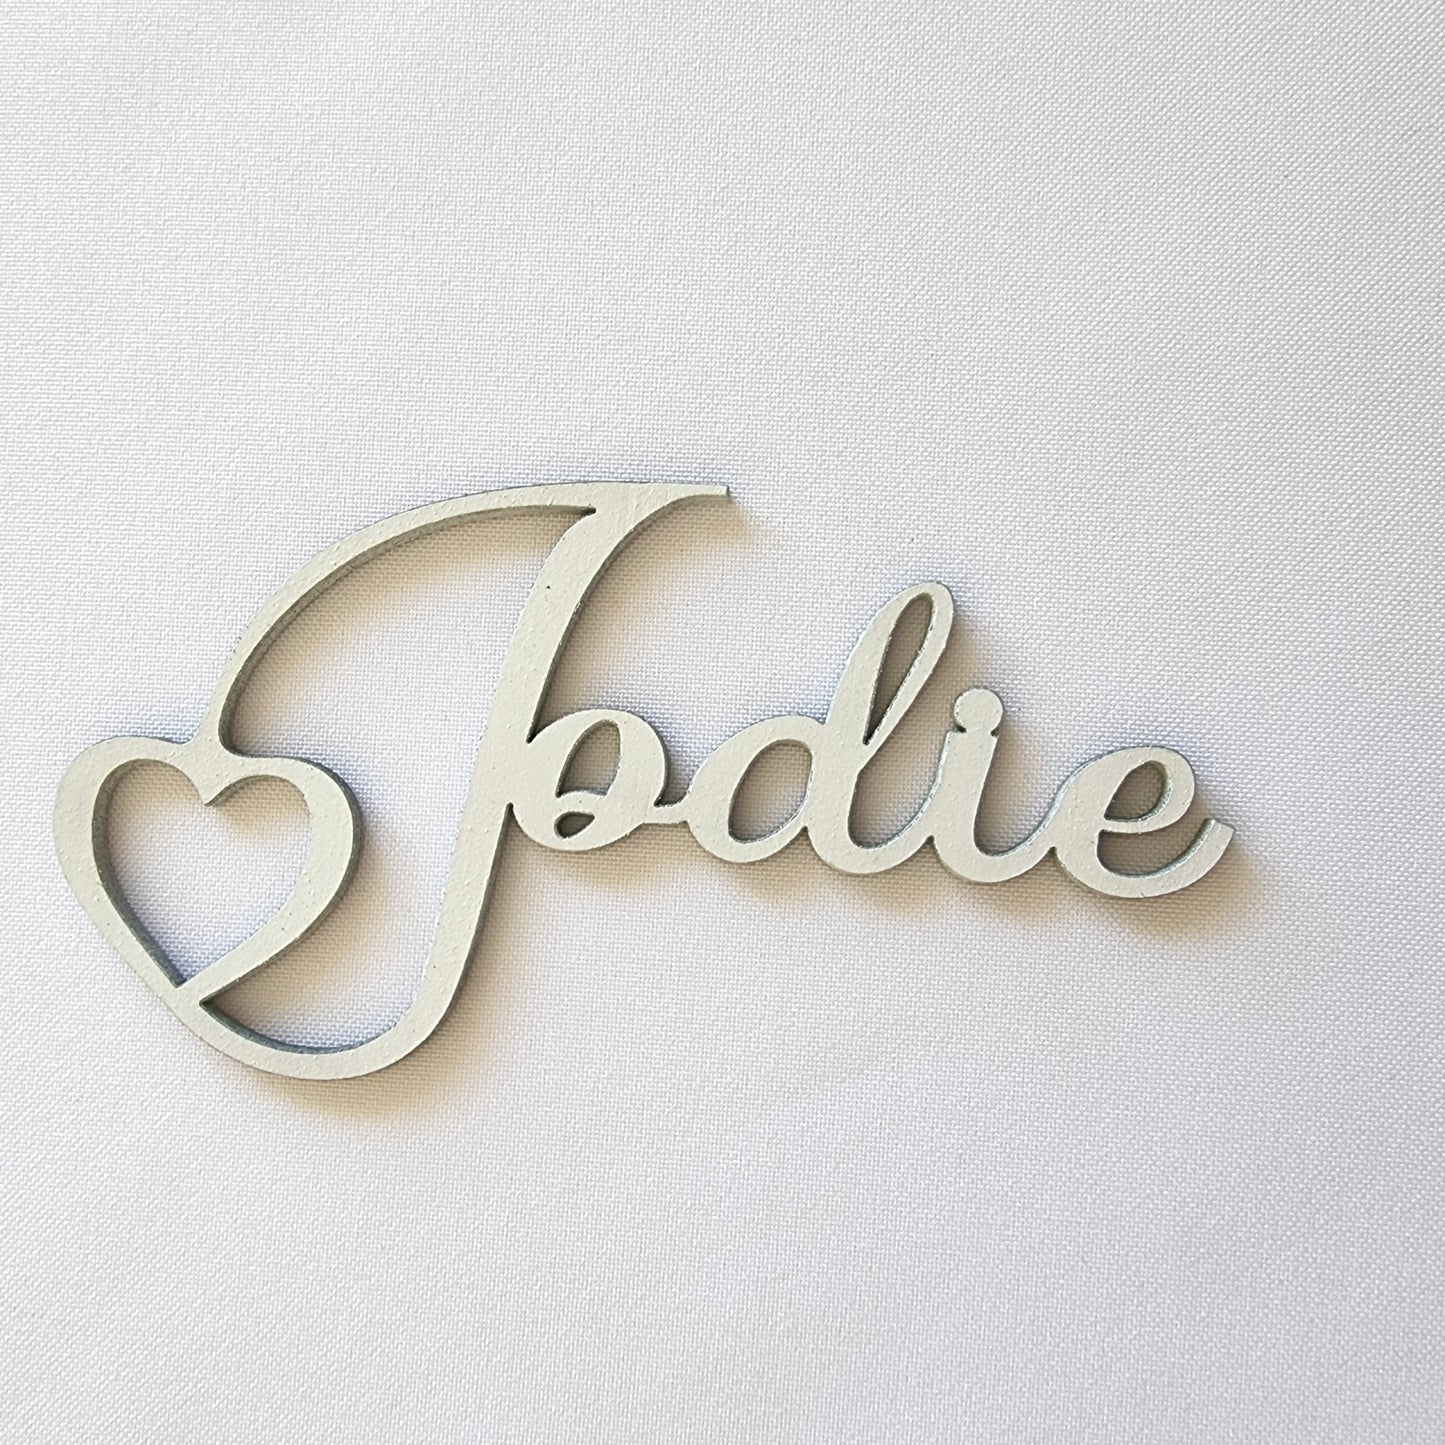 Wooden Place Name Cutouts - Name Cuts